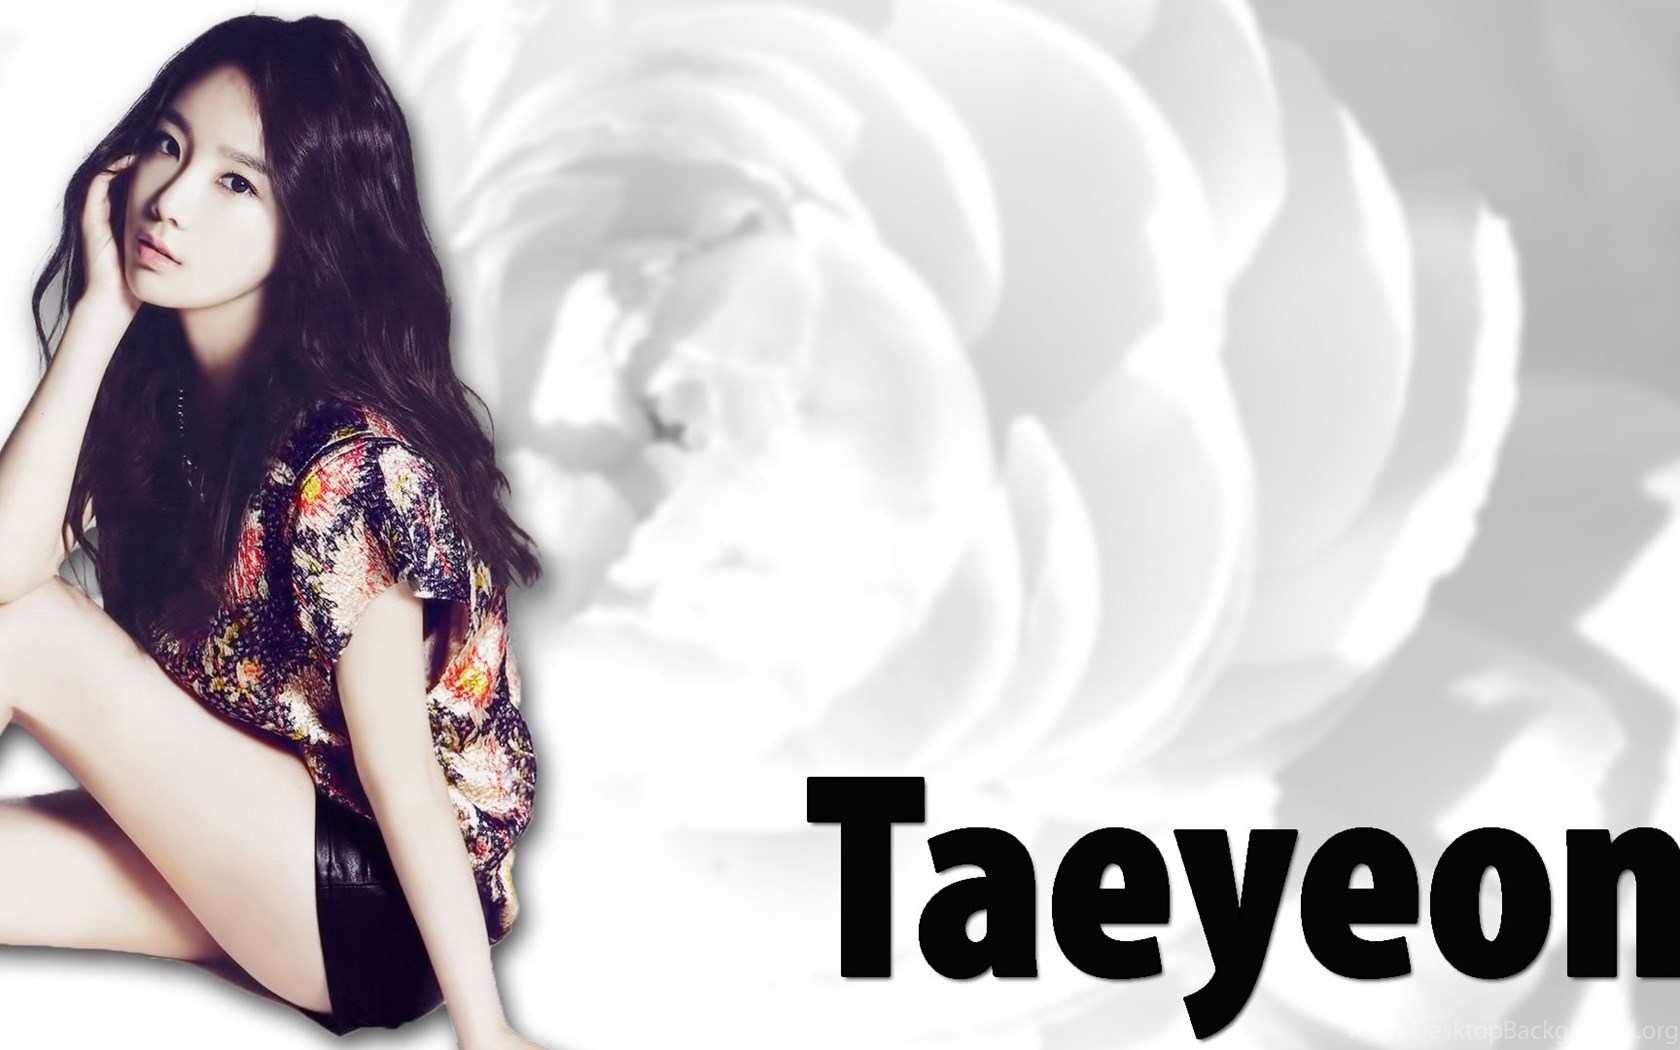 Snsd Taeyeon Wallpapers By Midniqhts On Deviantart Desktop Background Images, Photos, Reviews